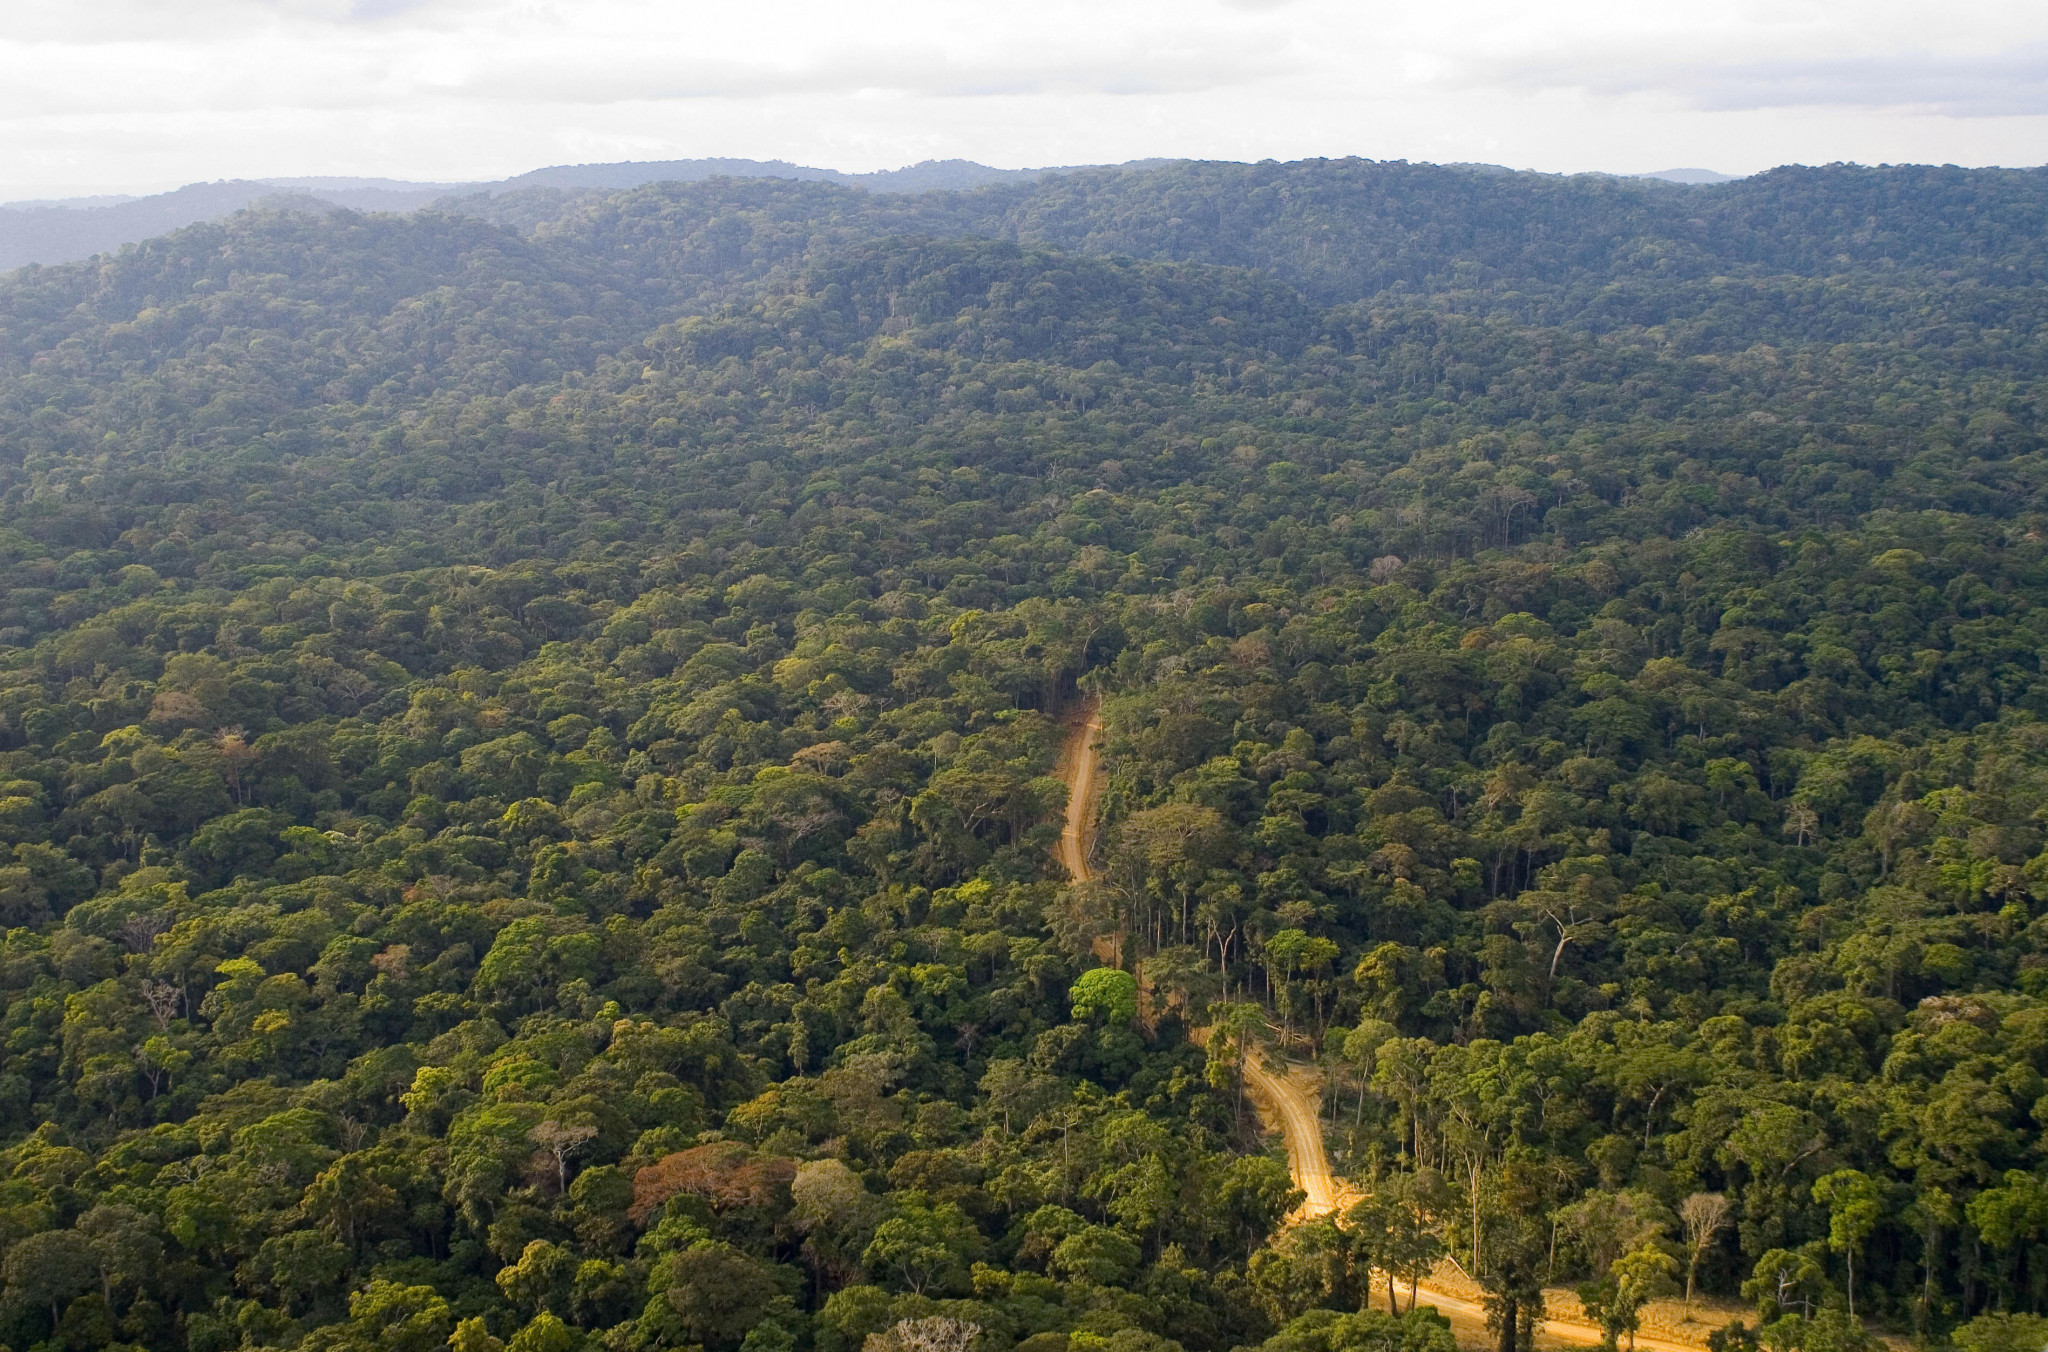 IOC to plant "Olympic Forest" in Africa to offset carbon emissions